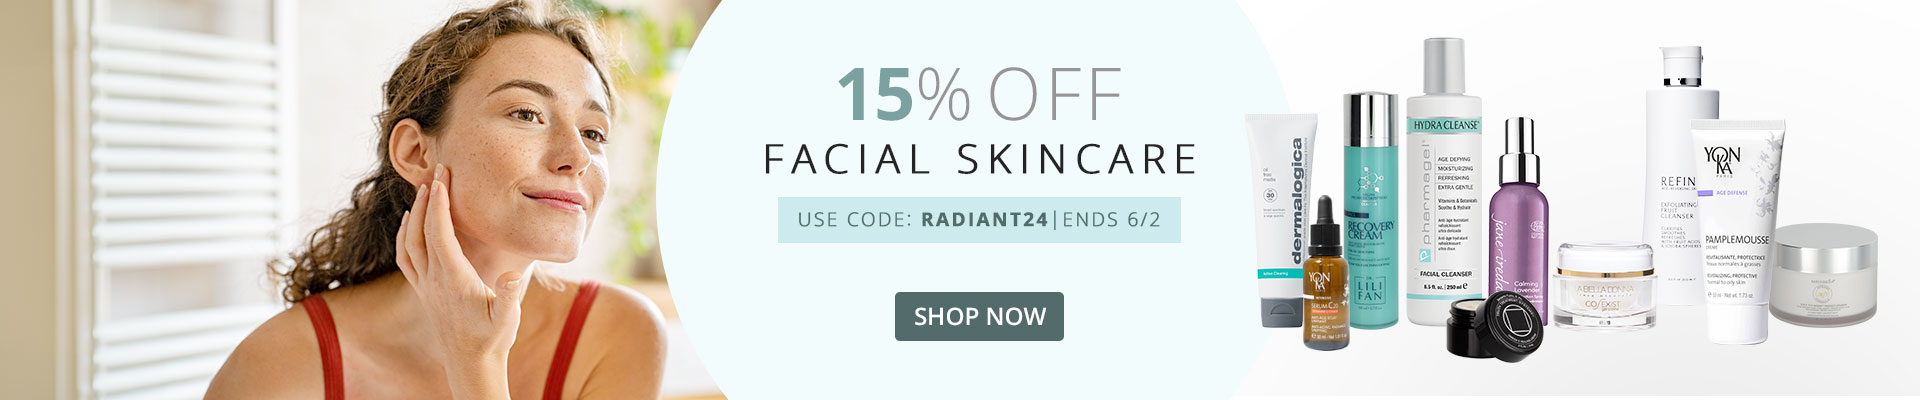 15% Off Facial Skincare | Use Code: RADIANT24 - Ends 6/2